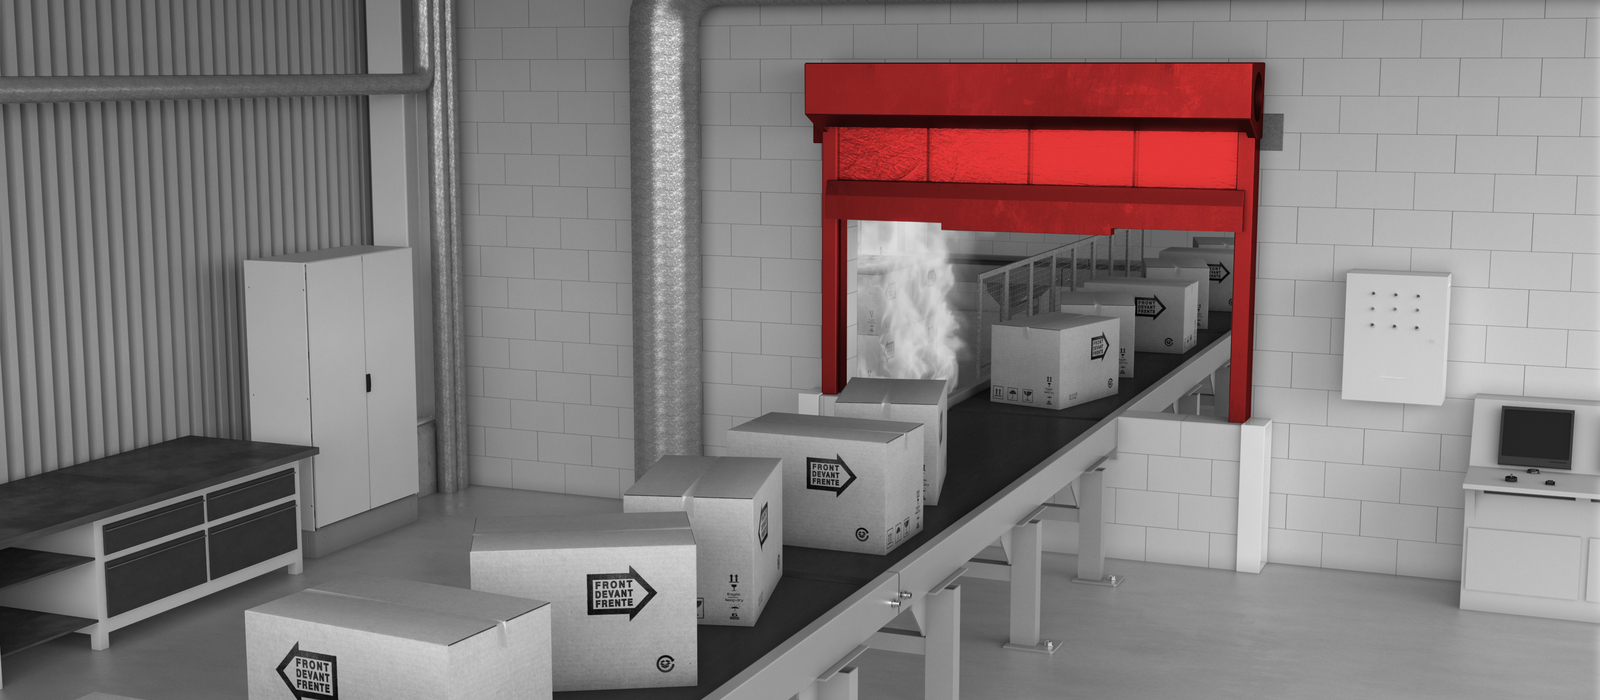 Fire protection for conveyor belts